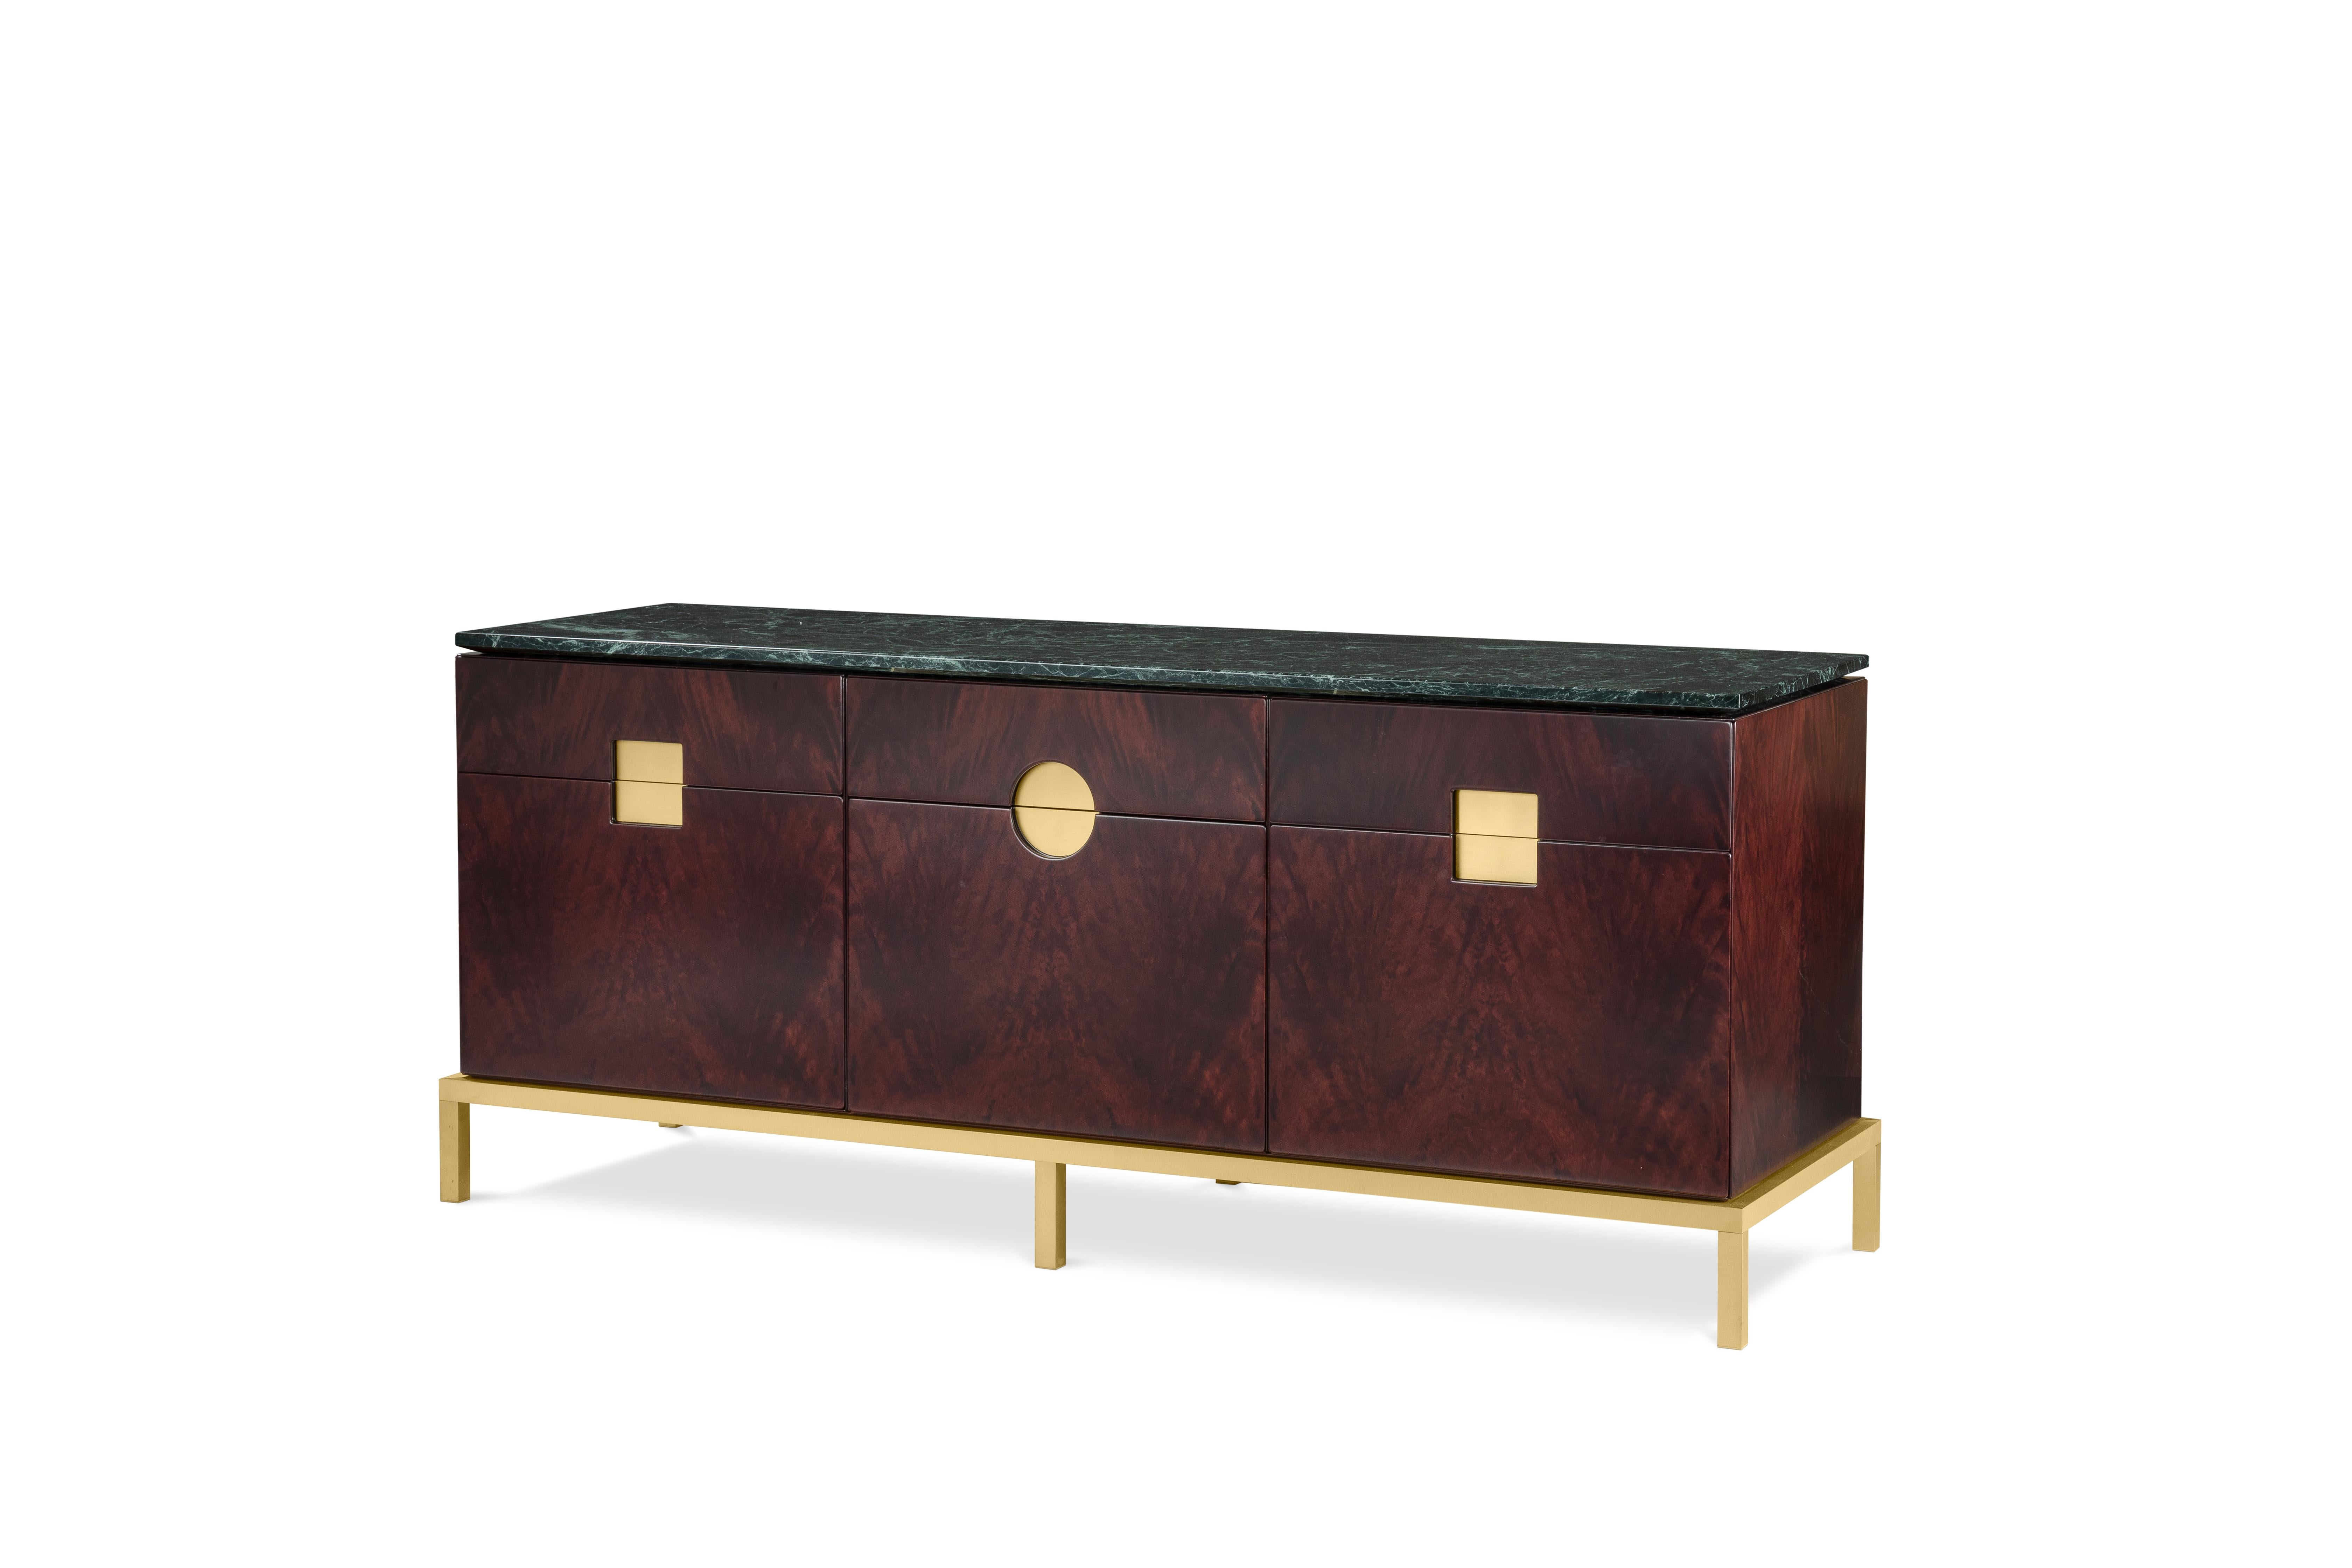 Elegant cabinet with essential lines of Japanese flavour. The slender structure in essence is opposed by four slim legs in gilded metal. Zuan is recognizable by the detail of the support, a quarter of a circle with great aesthetic and functionality,